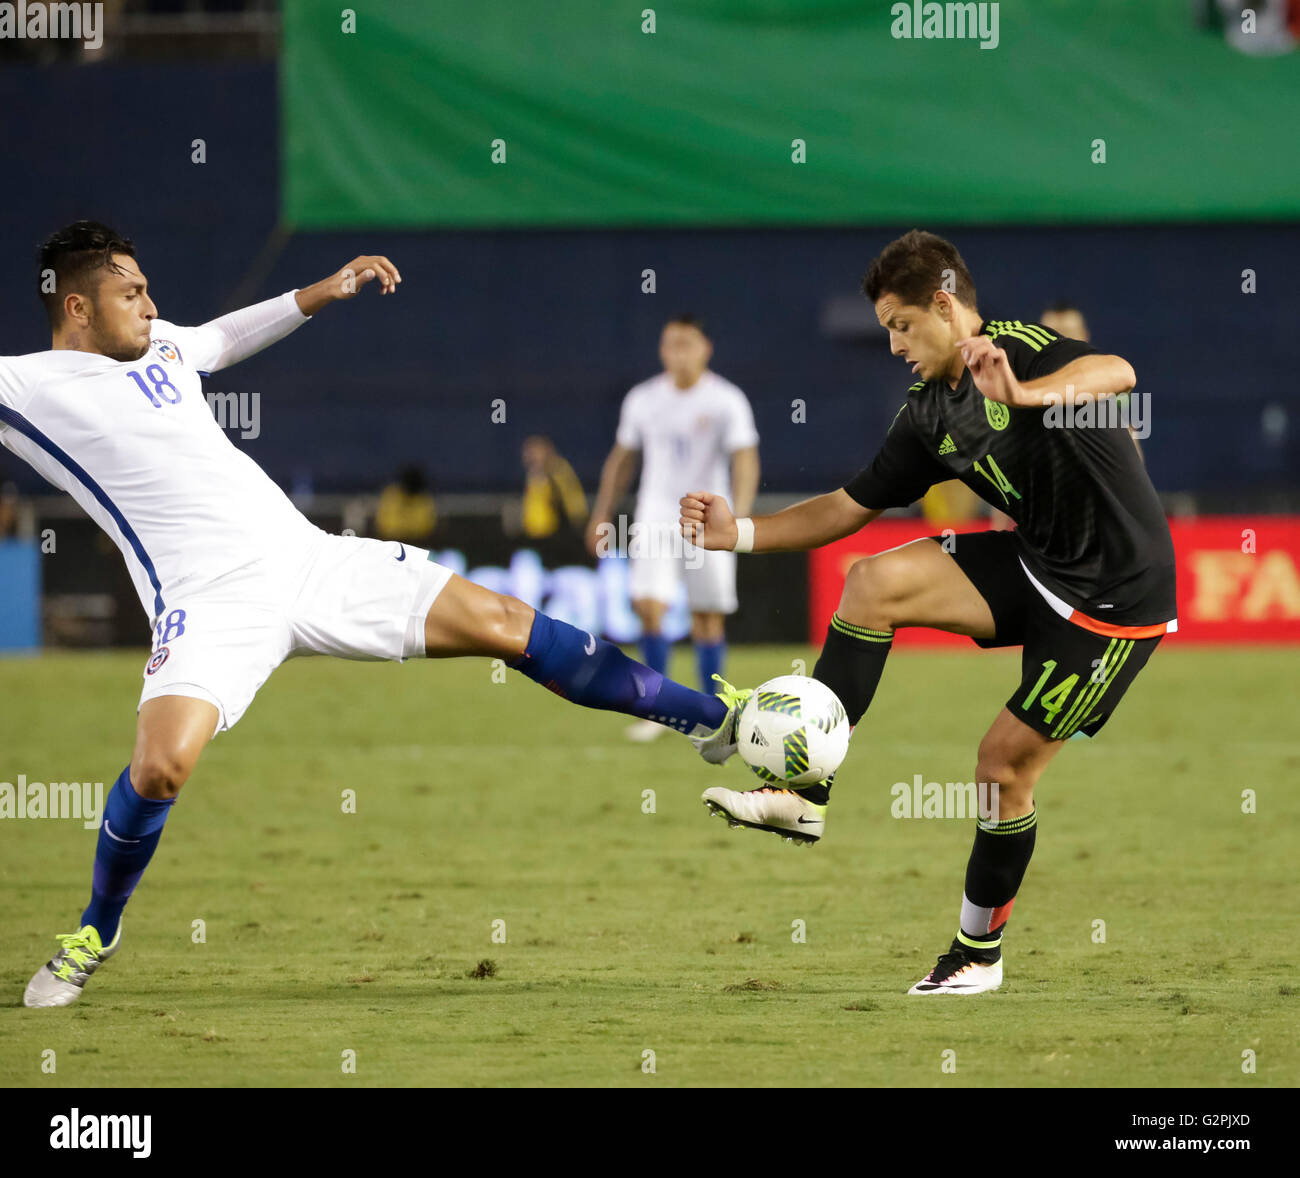 San Diego, California, USA. 01st June, 2016. Mexican Forward #14 Javier ''Chicharito'' Hernandez tries to handle the ball around Chilean #18 Gonzalo Jara during an international soccer match between Mexico and Chile at Qualcomm Stadium in San Diego, California. Mexico defeats Chile 1-0. Justin Cooper/CSM/Alamy Live News Stock Photo